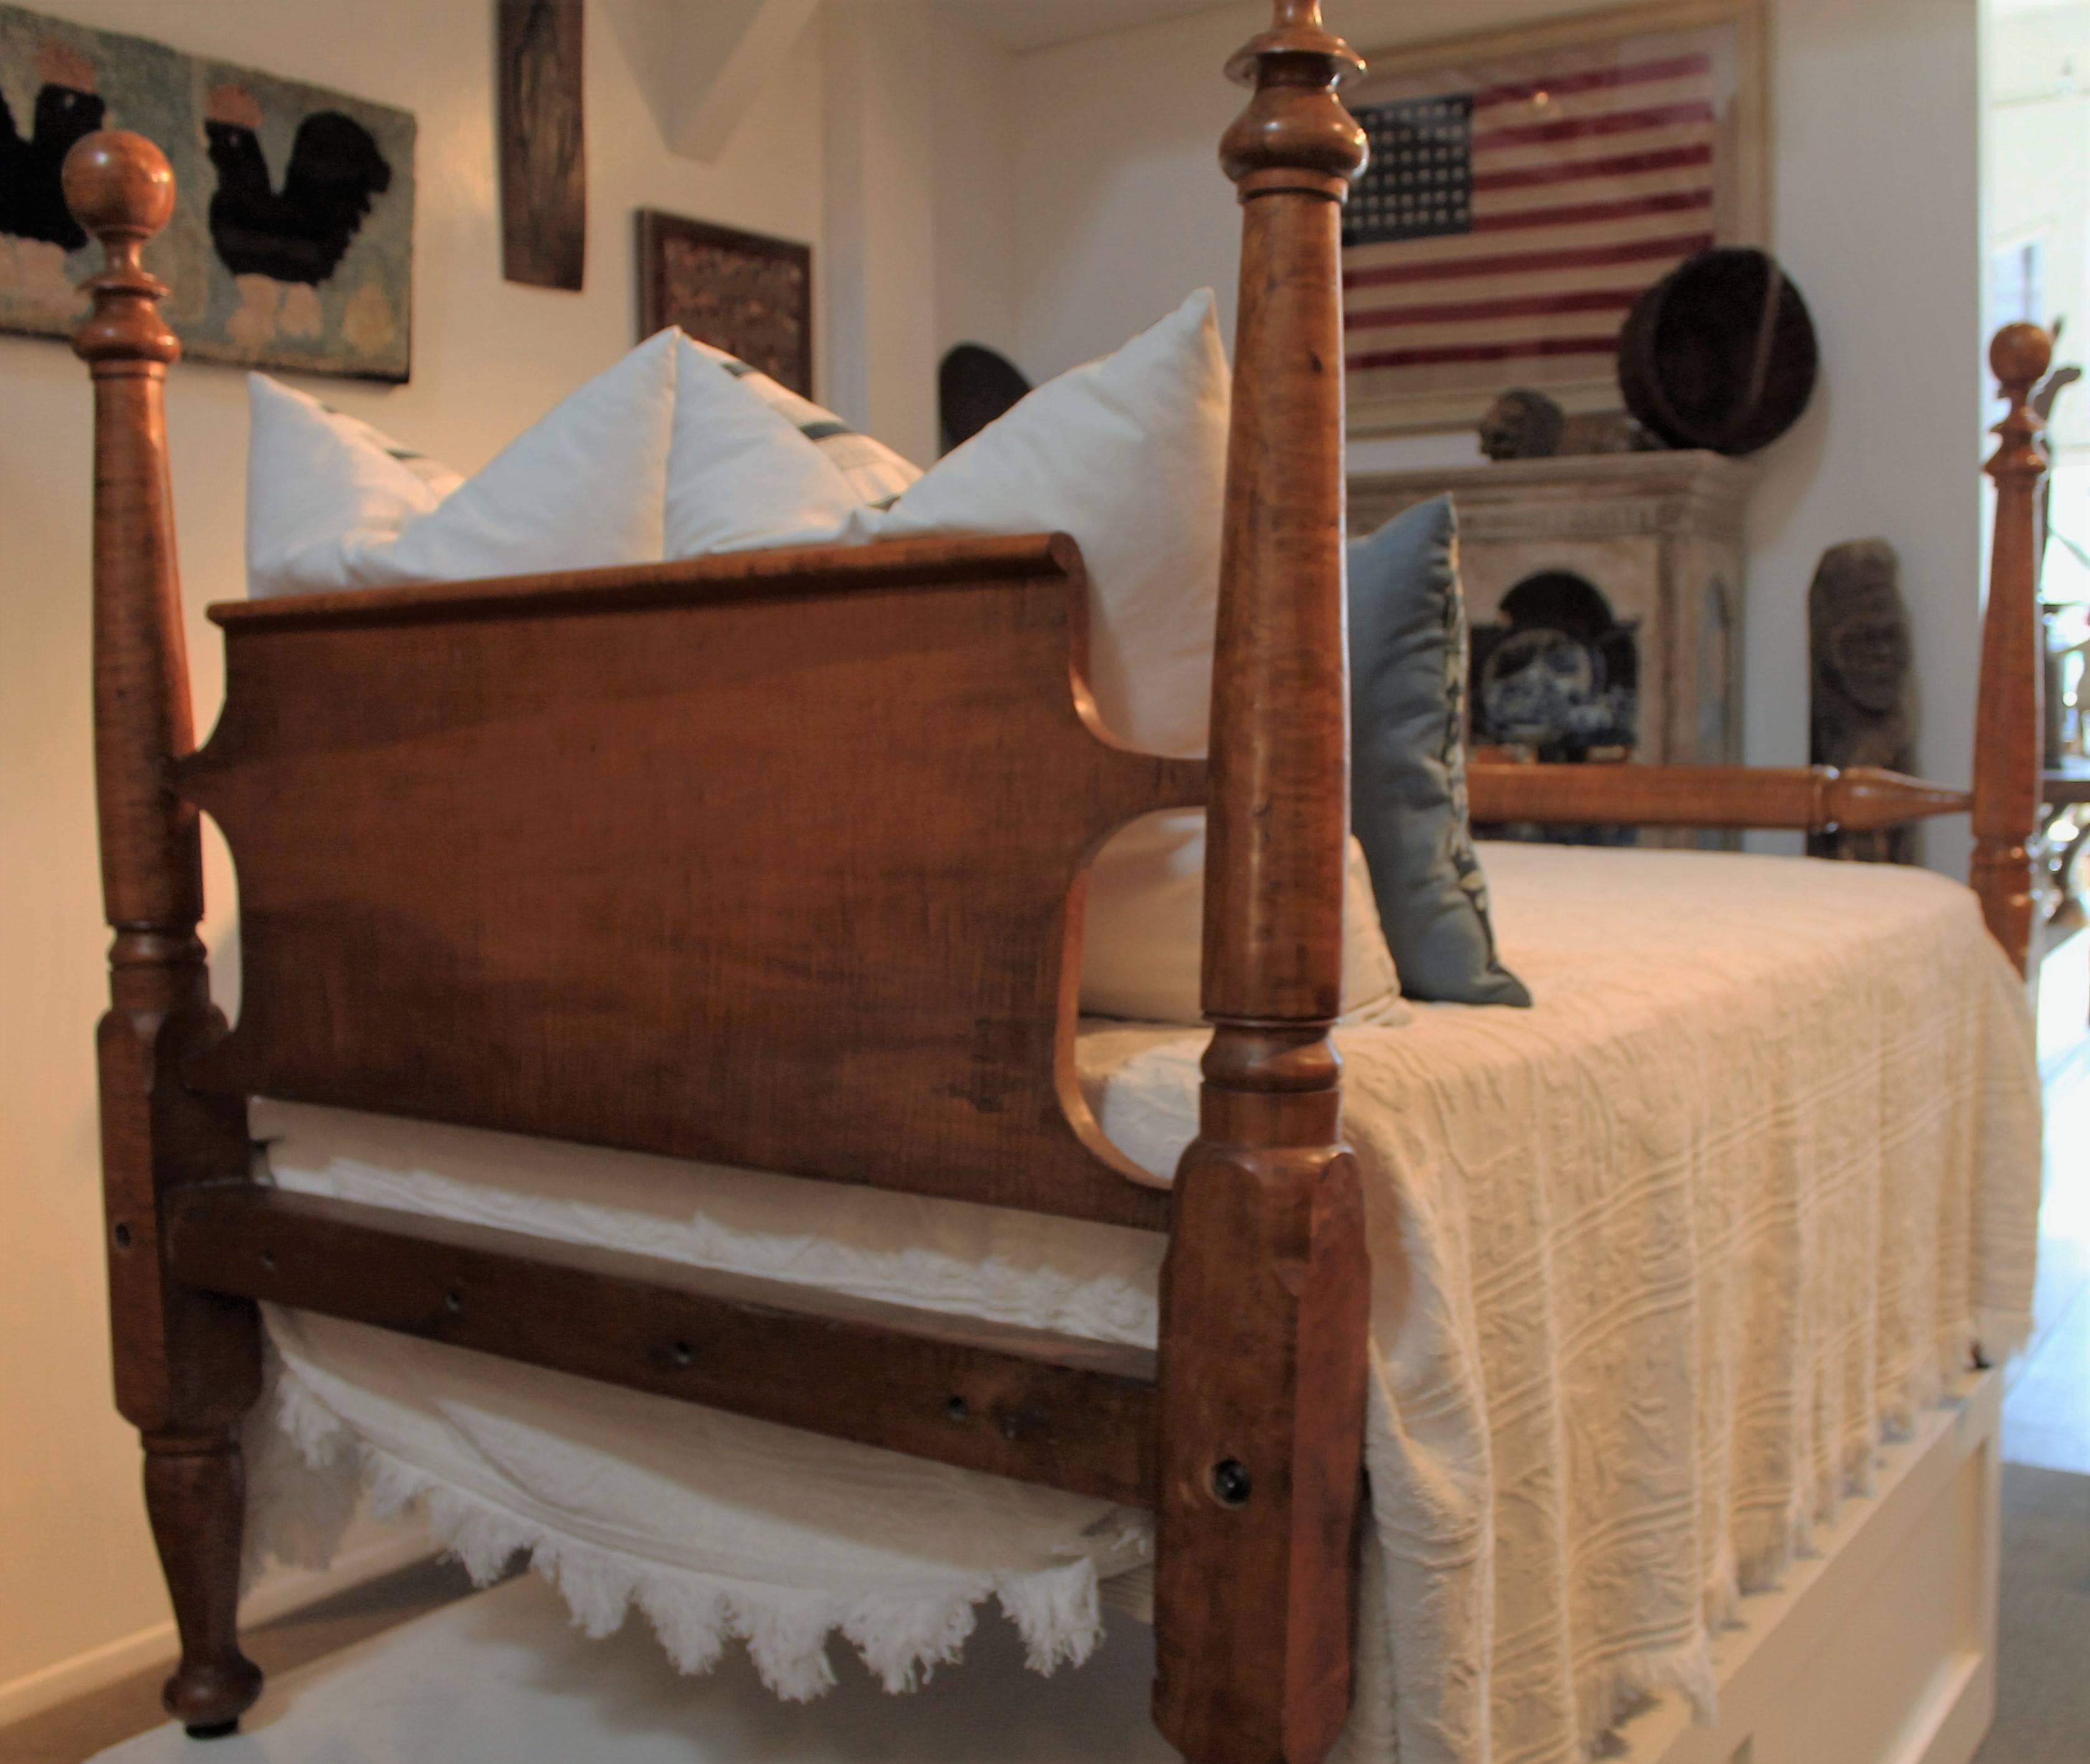 This four-poster bed bird's-eye maple bed is in very good and sturdy condition. The headboard is a flat rolled back panel. The 3/4 bed frame comes with a custom-made box spring and mattress. The iron brackets hold the box spring in place perfectly.